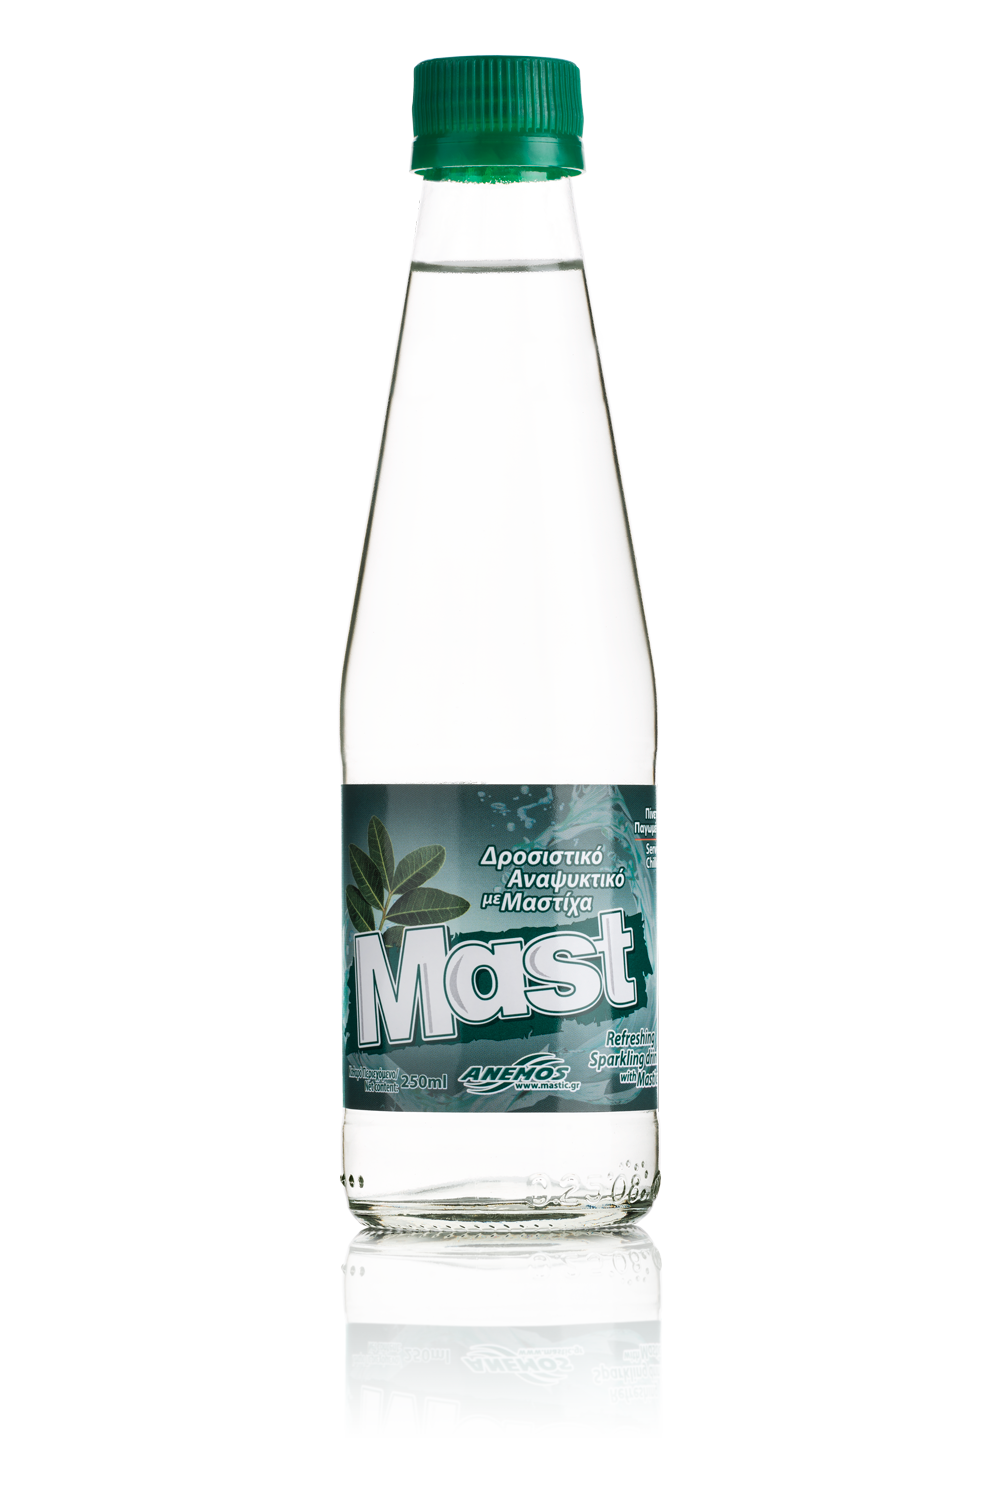 Mast soft drink with mastic glass bottle 250ml